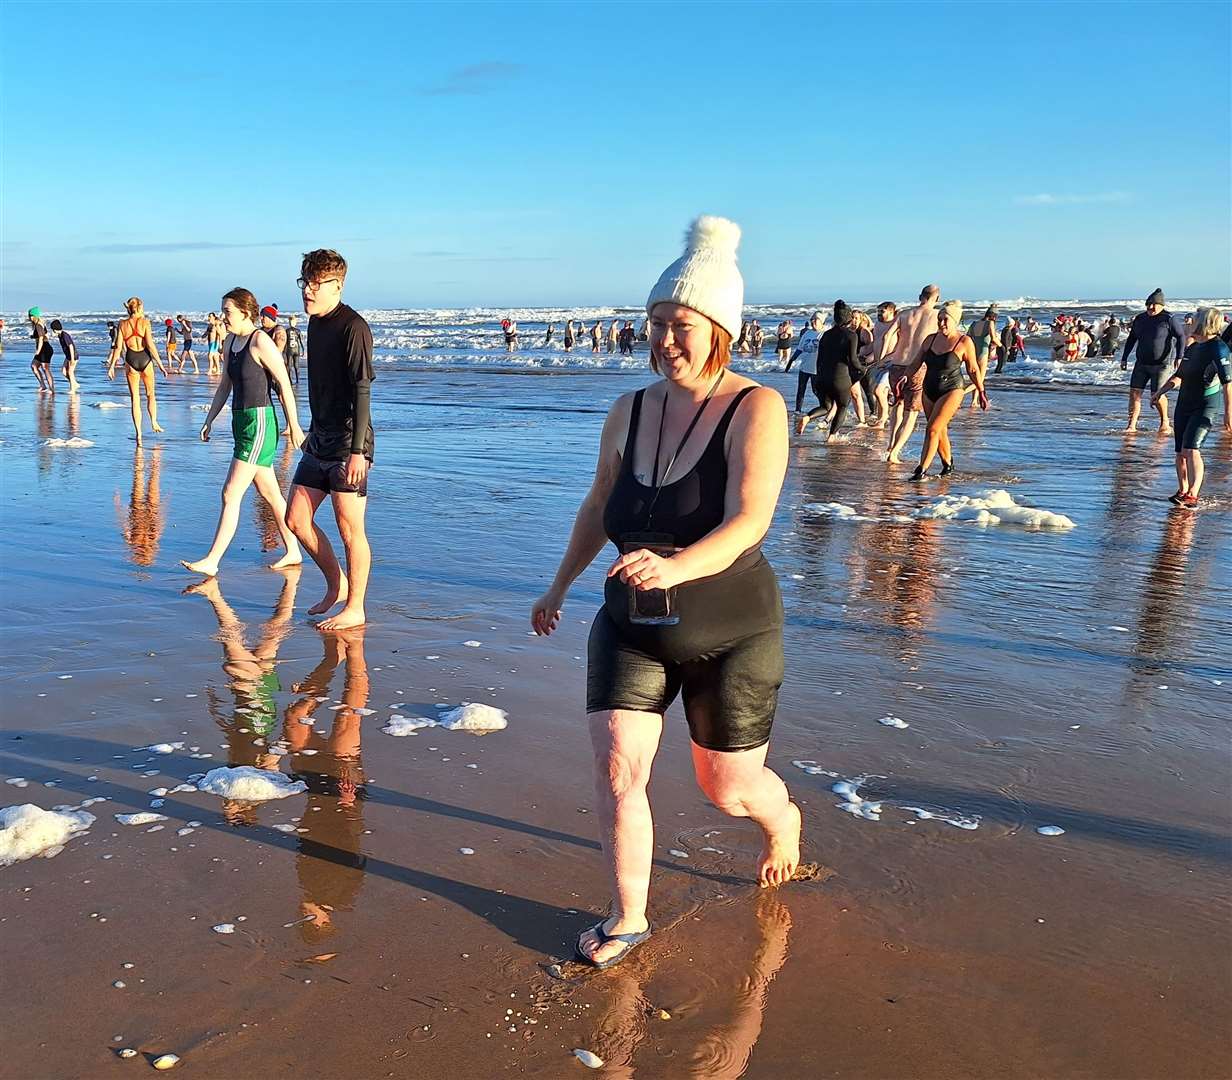 Swimmers coming out of the water.